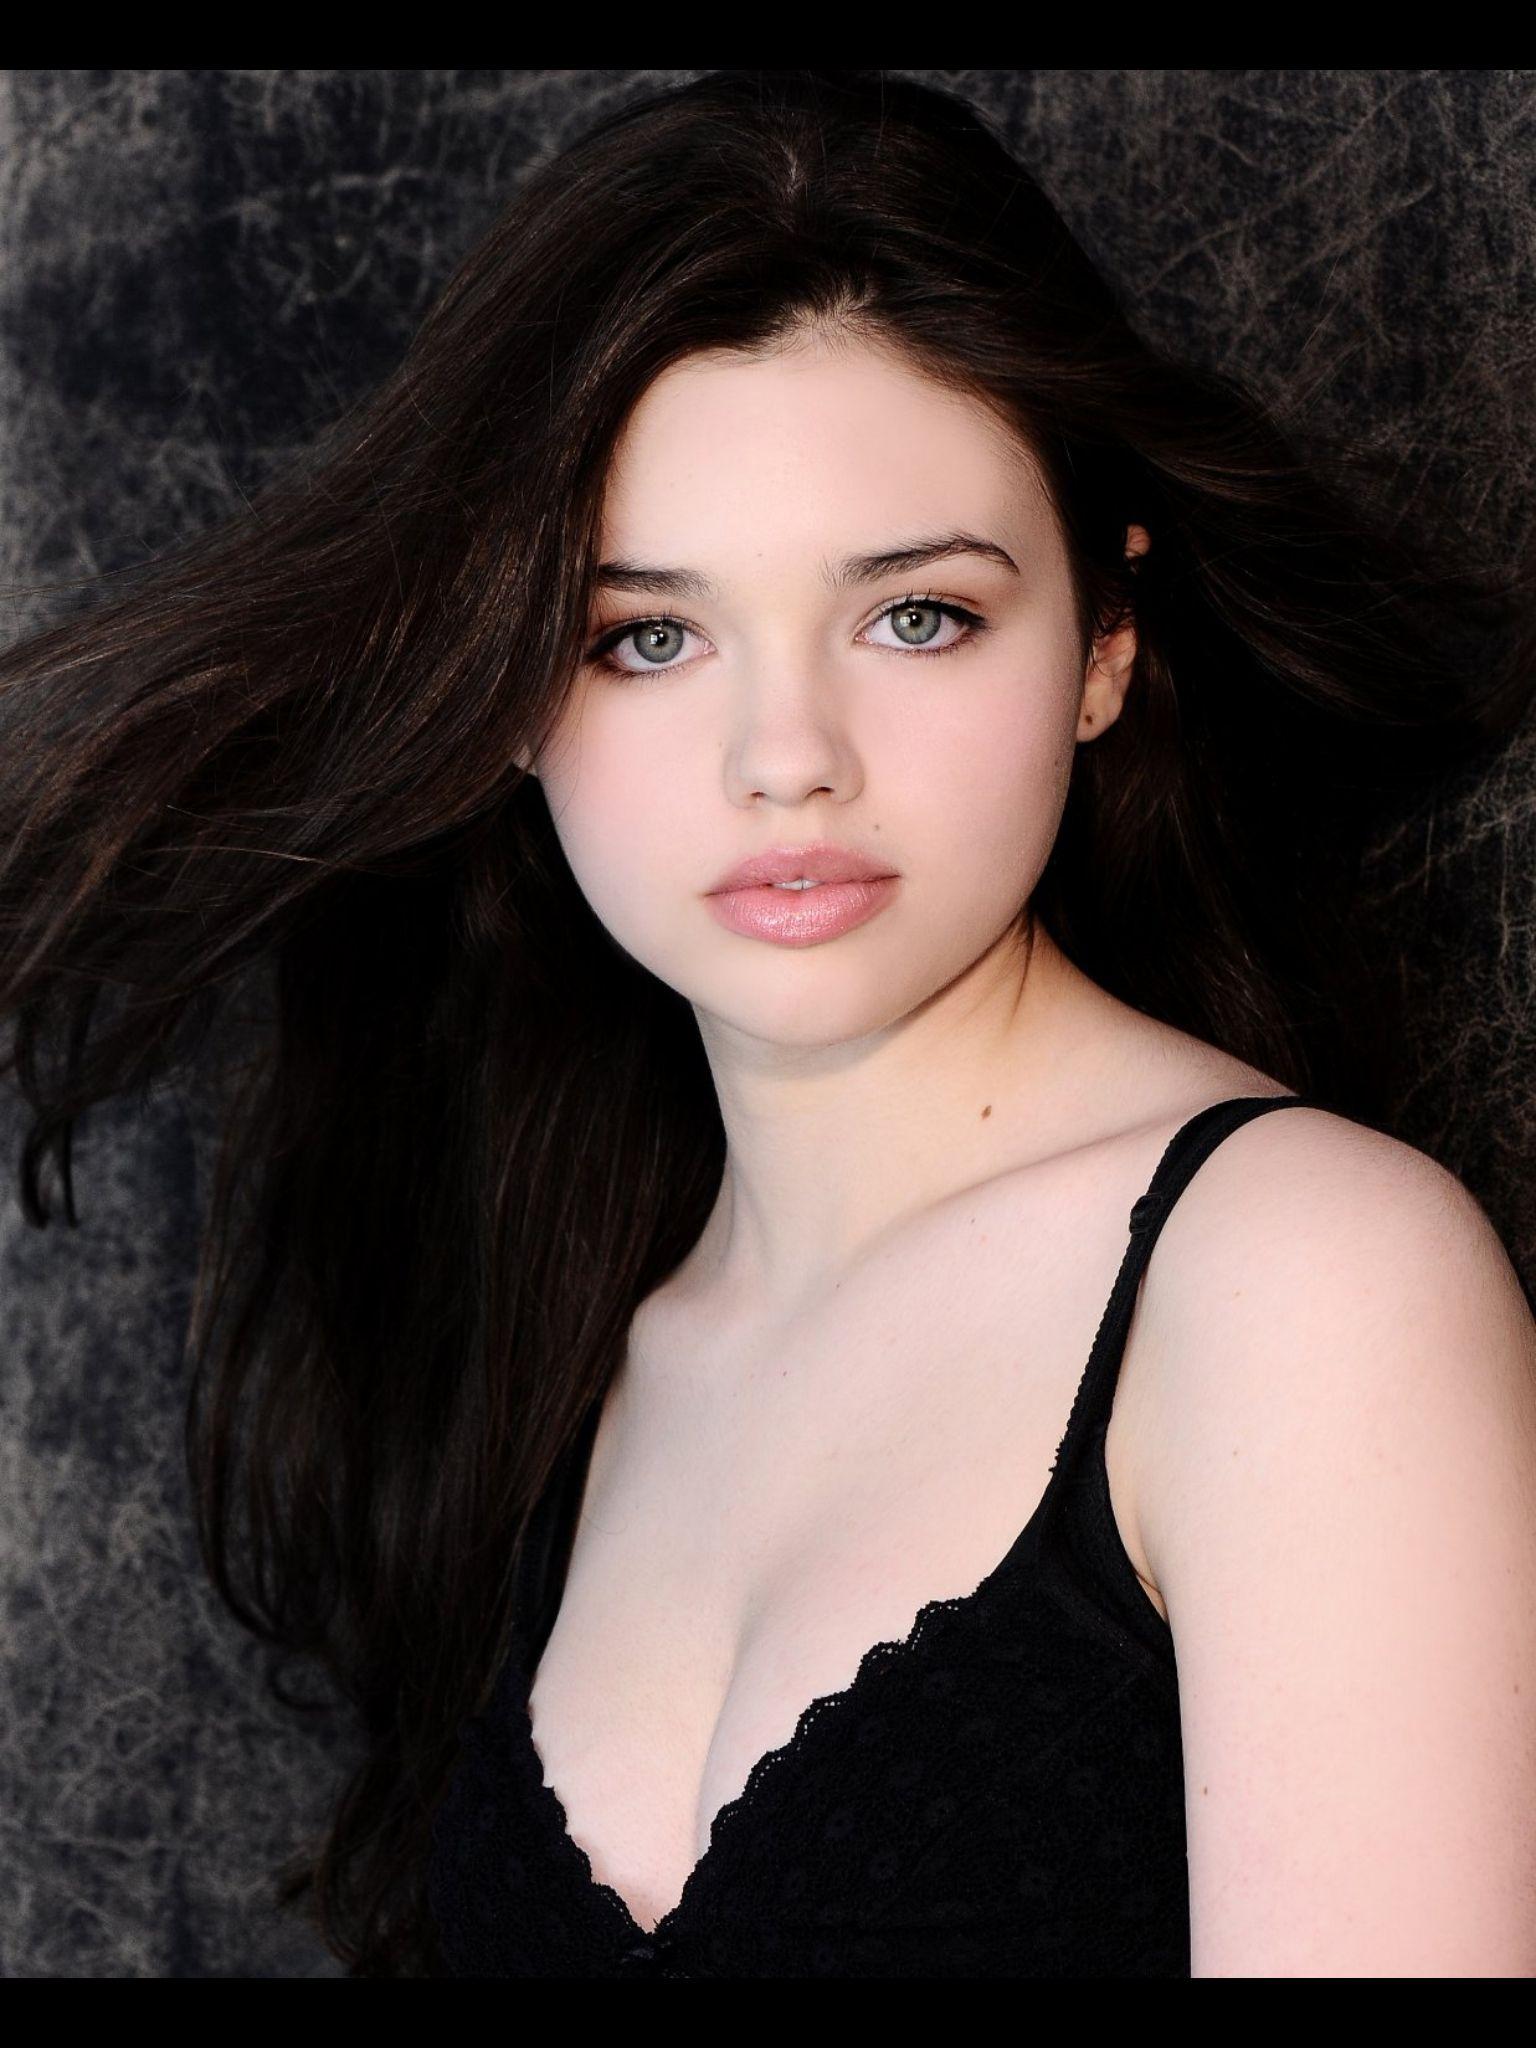 49 India Eisley Nude Pictures Can Make You Submit To Her Glitzy Looks 28